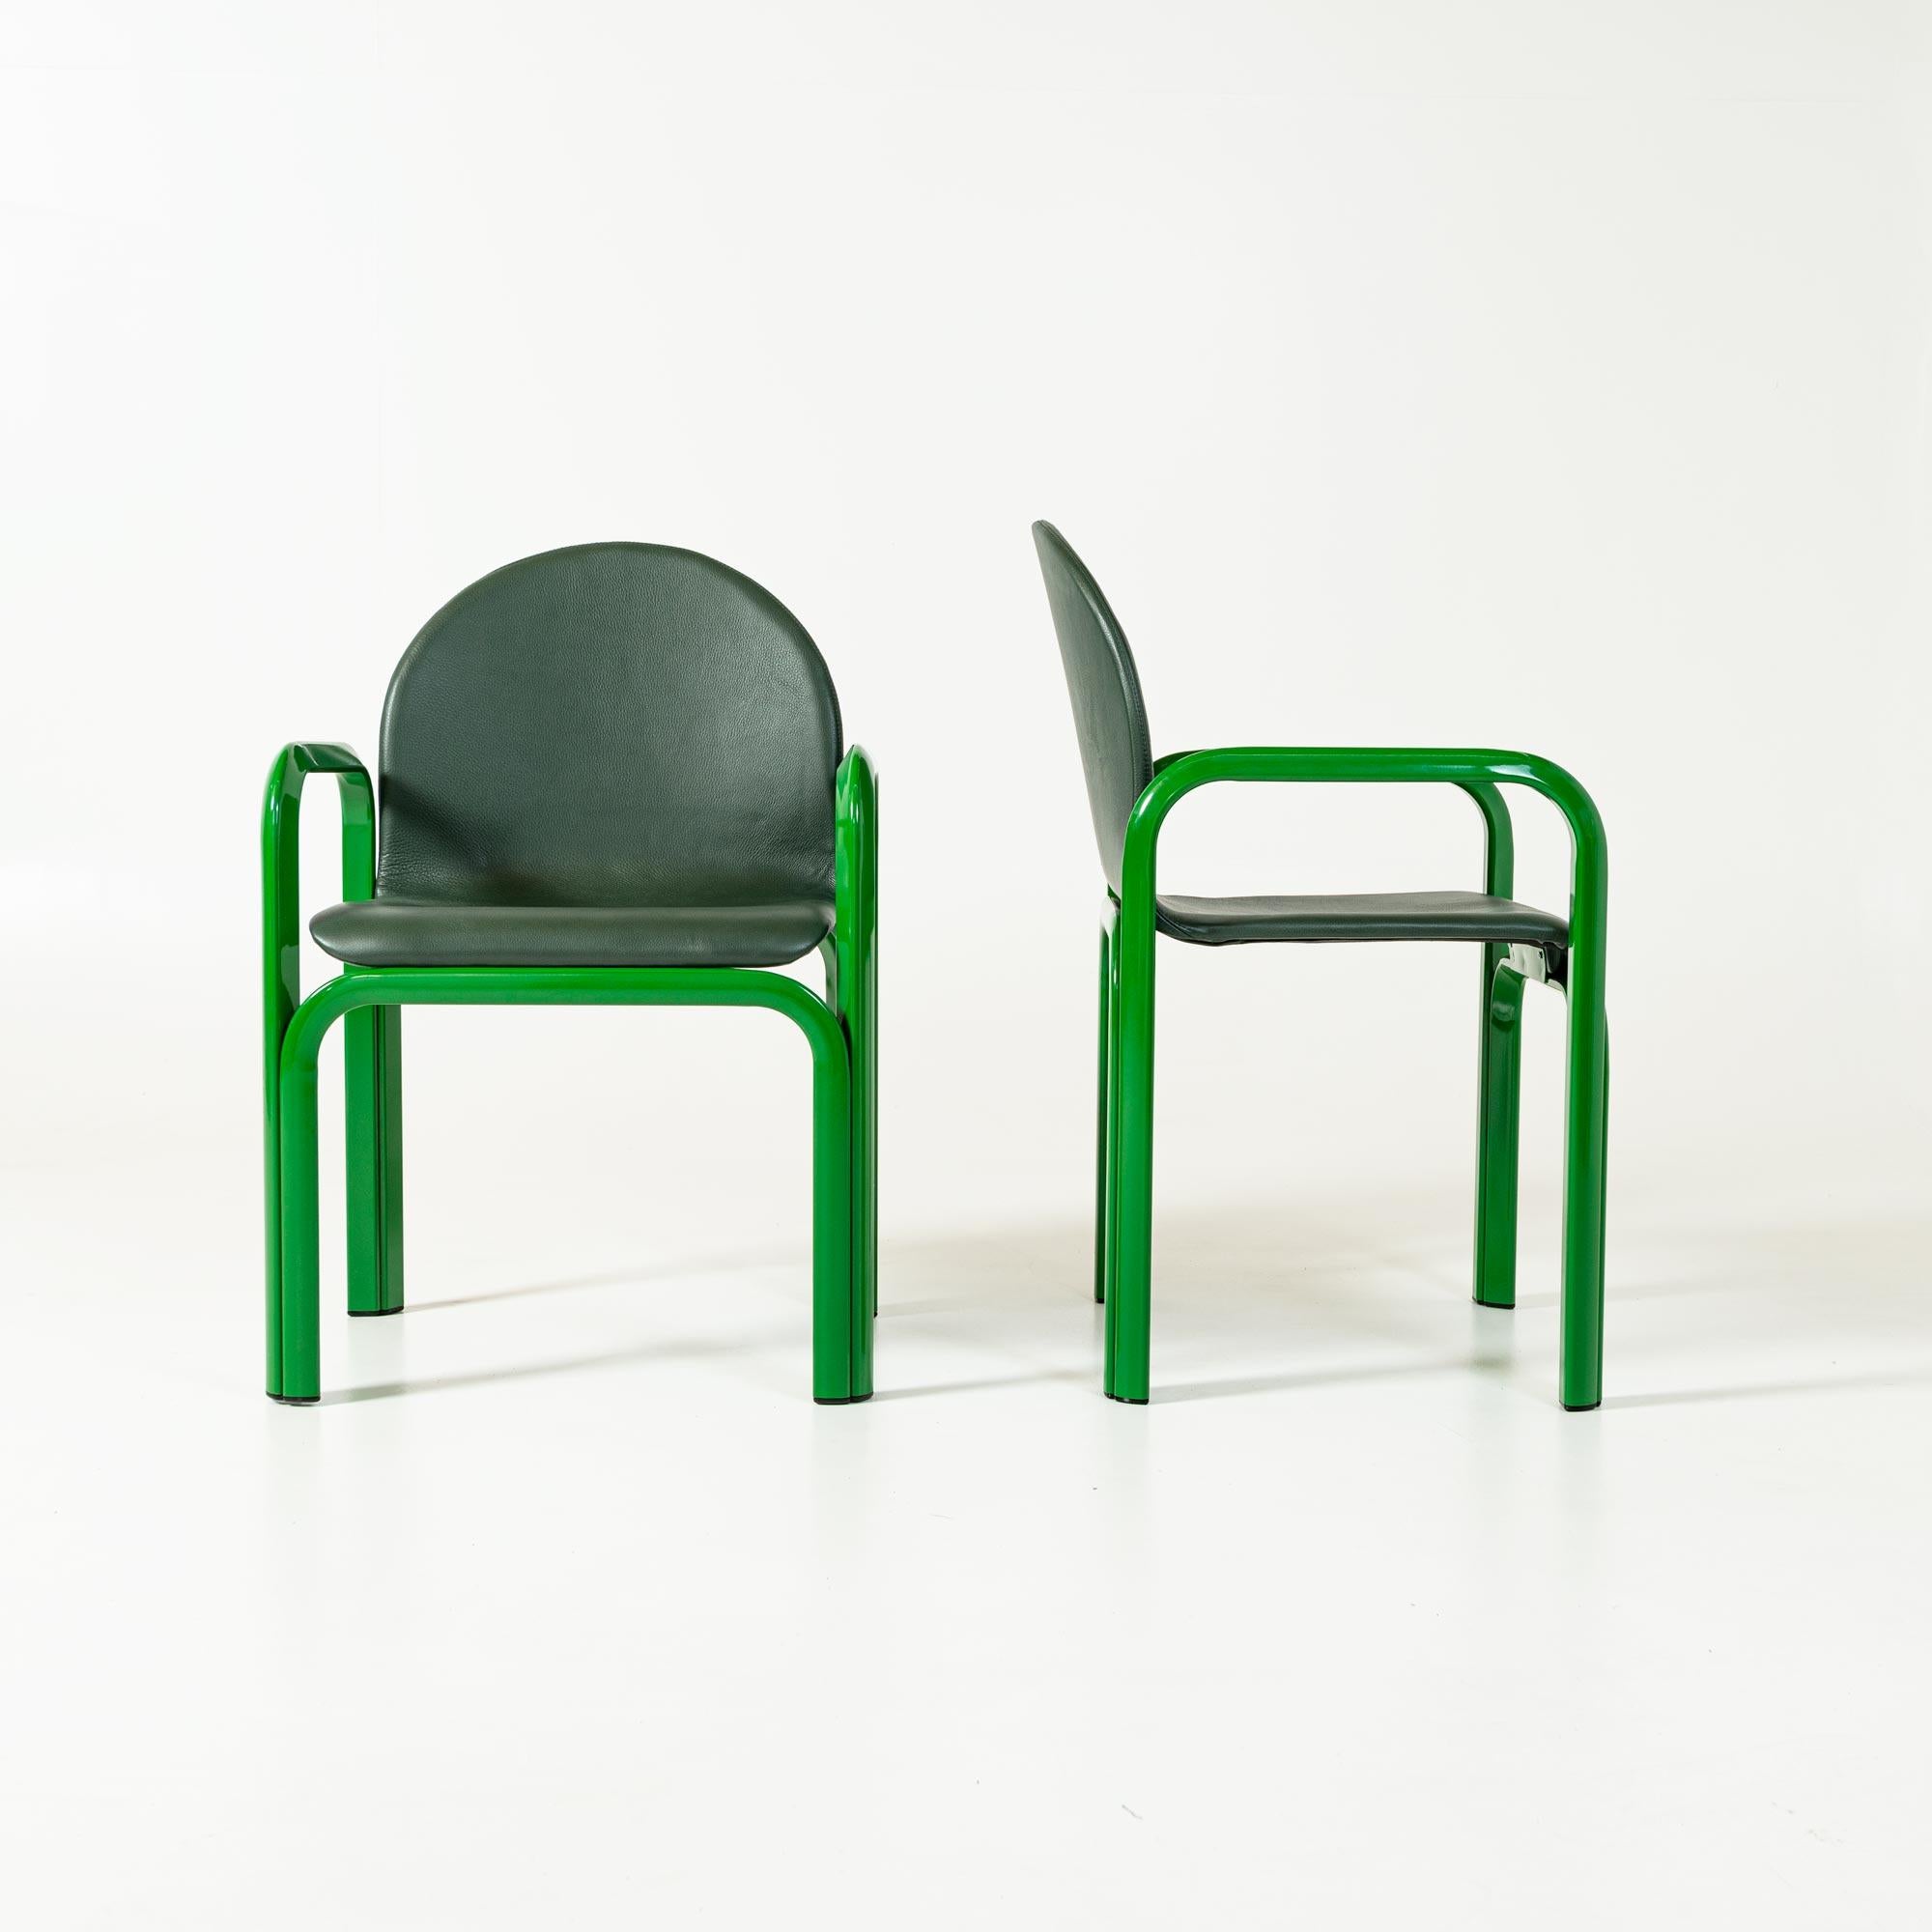 This is a set of 4 Italian Postmodern Orsay dining armchairs model 54A, designed by Gae Aulenti for Knoll, fully restored in tonal Green. The frames were all sandblasted and power coated in spring green, while all the seats were re-foamed and